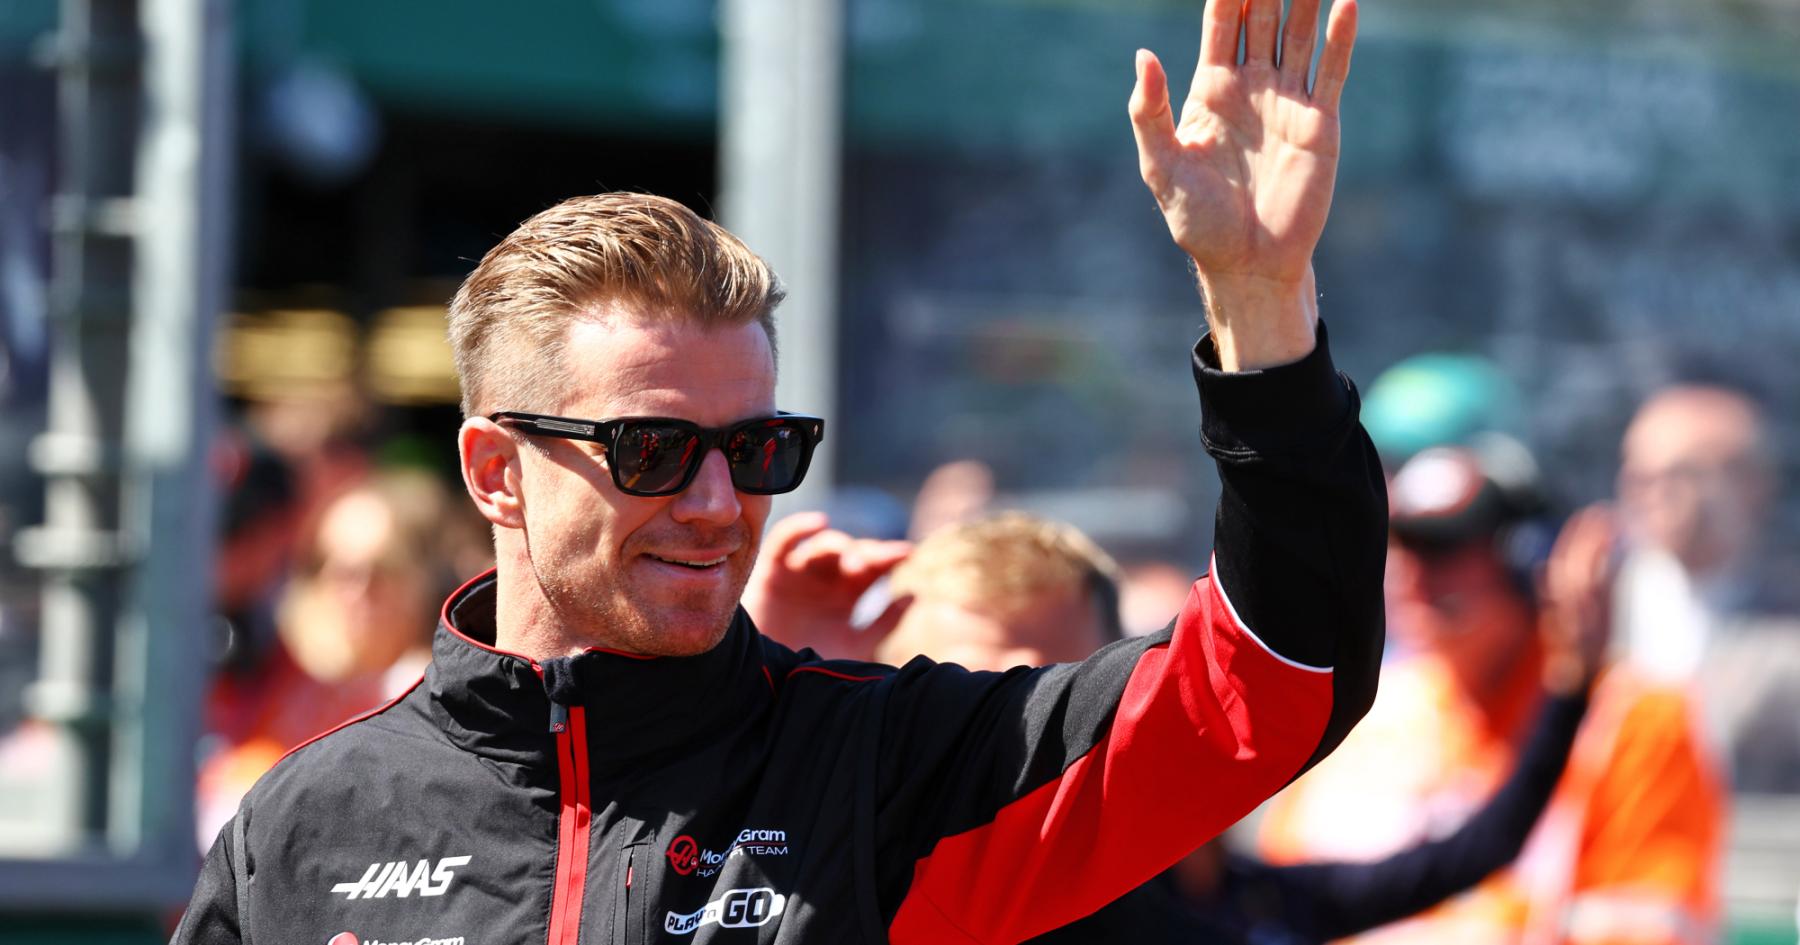 Racing Return: Hulkenberg Primed to Rev Up with Exciting New F1 Team